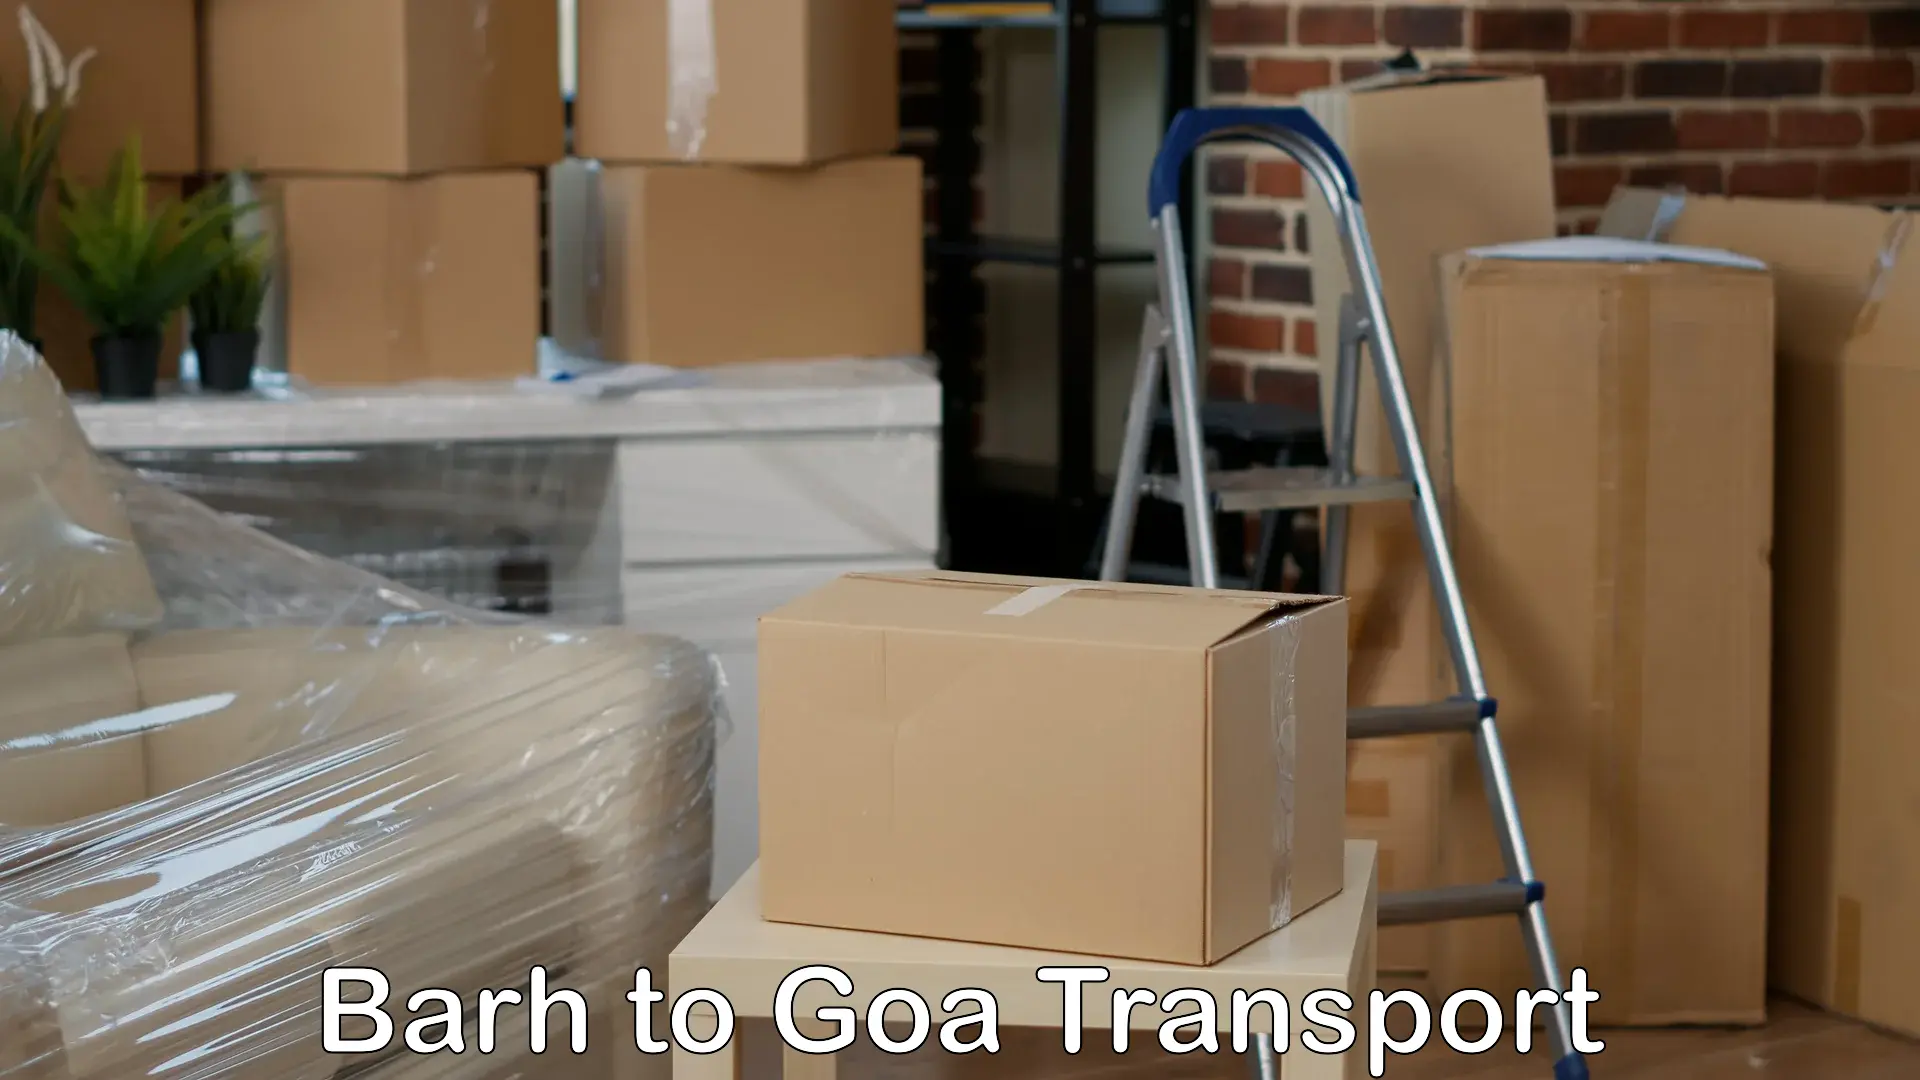 Transport shared services in Barh to Goa